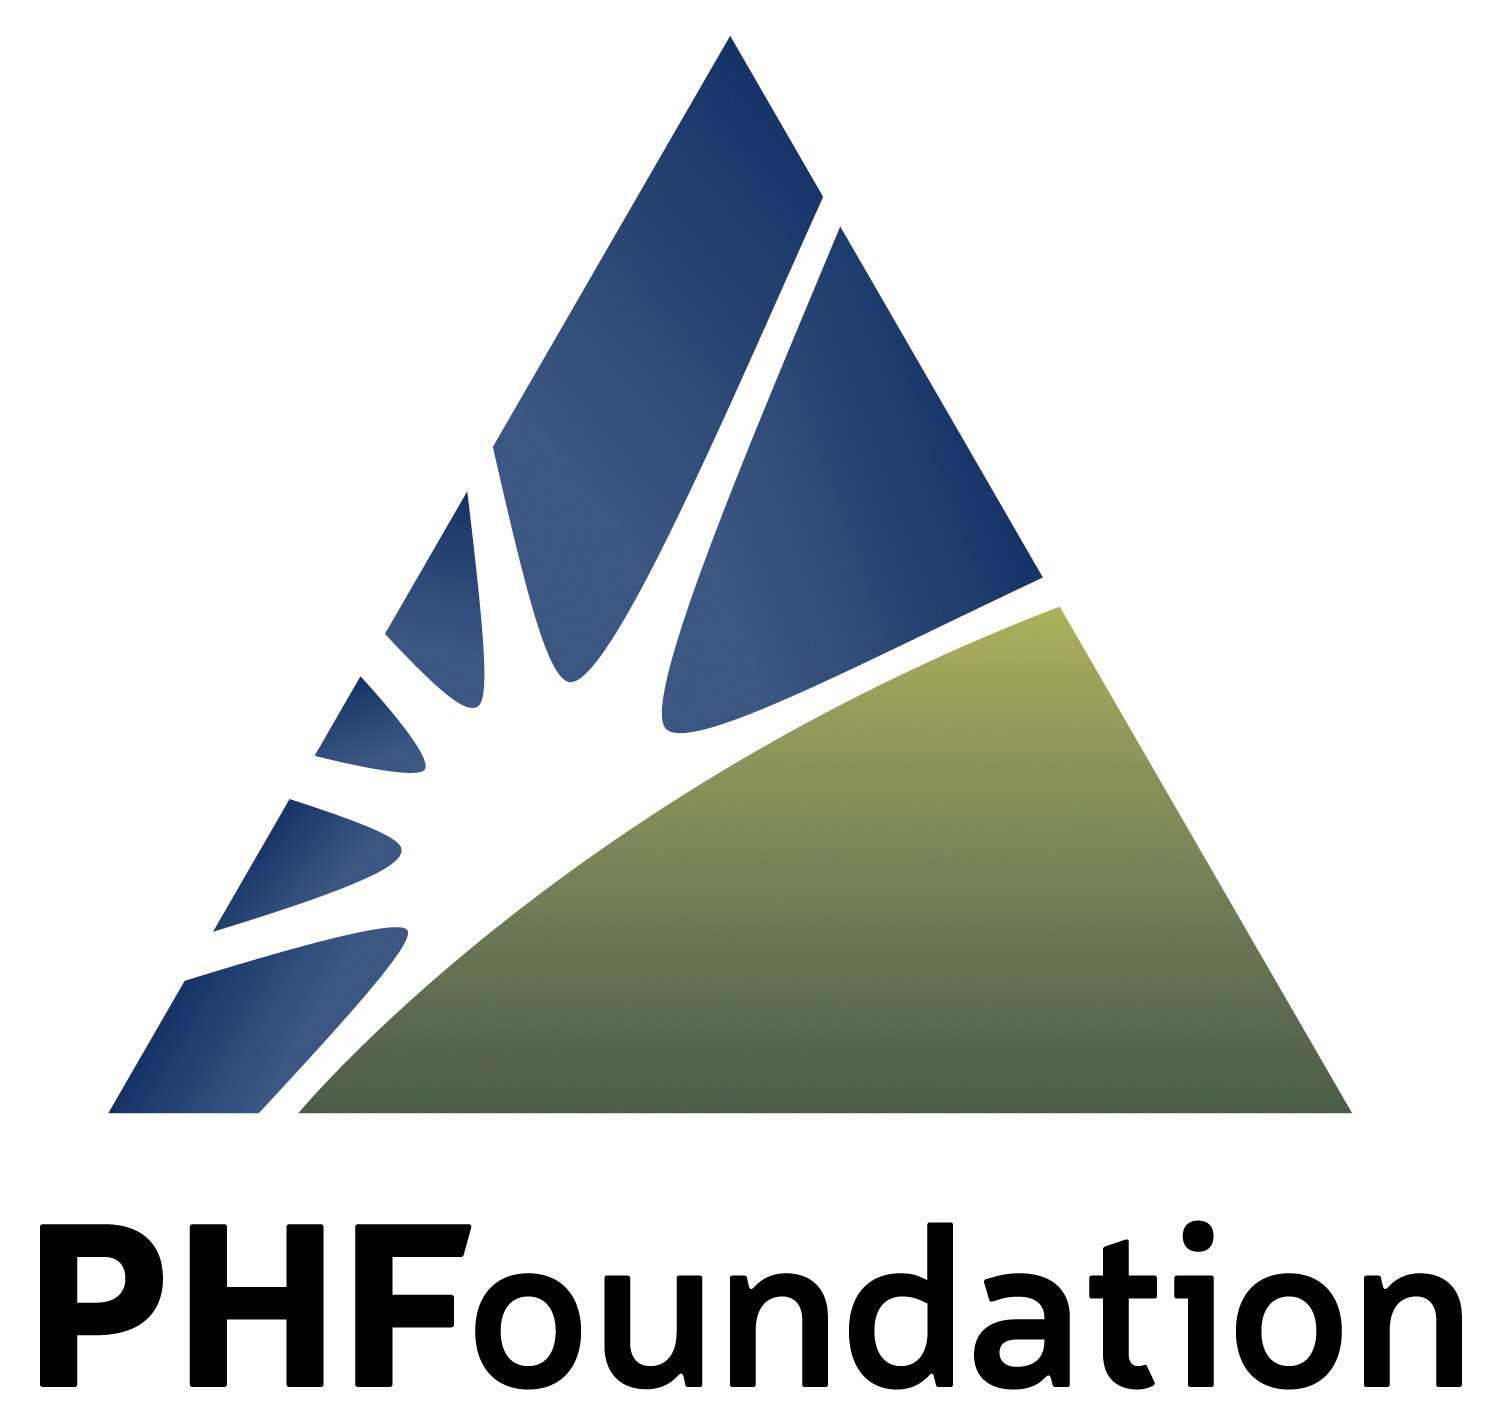 Portage Health Foundation.png